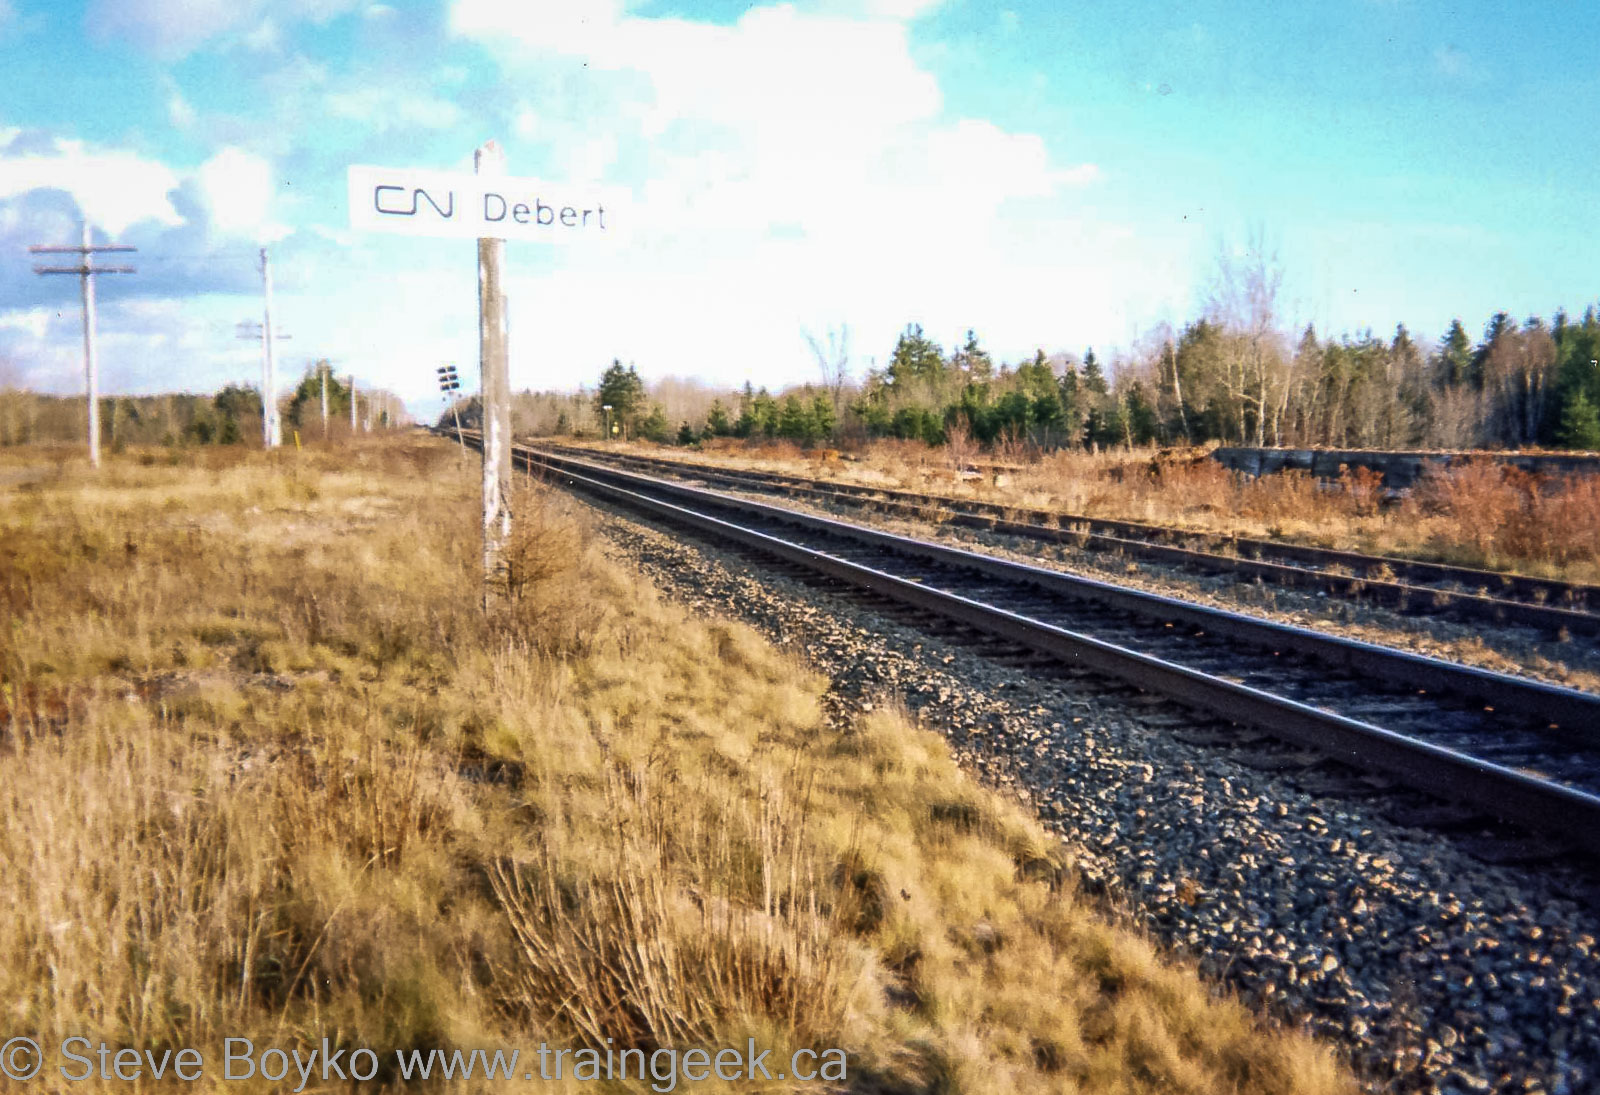 Photograph of railway track with a sign DEBERT